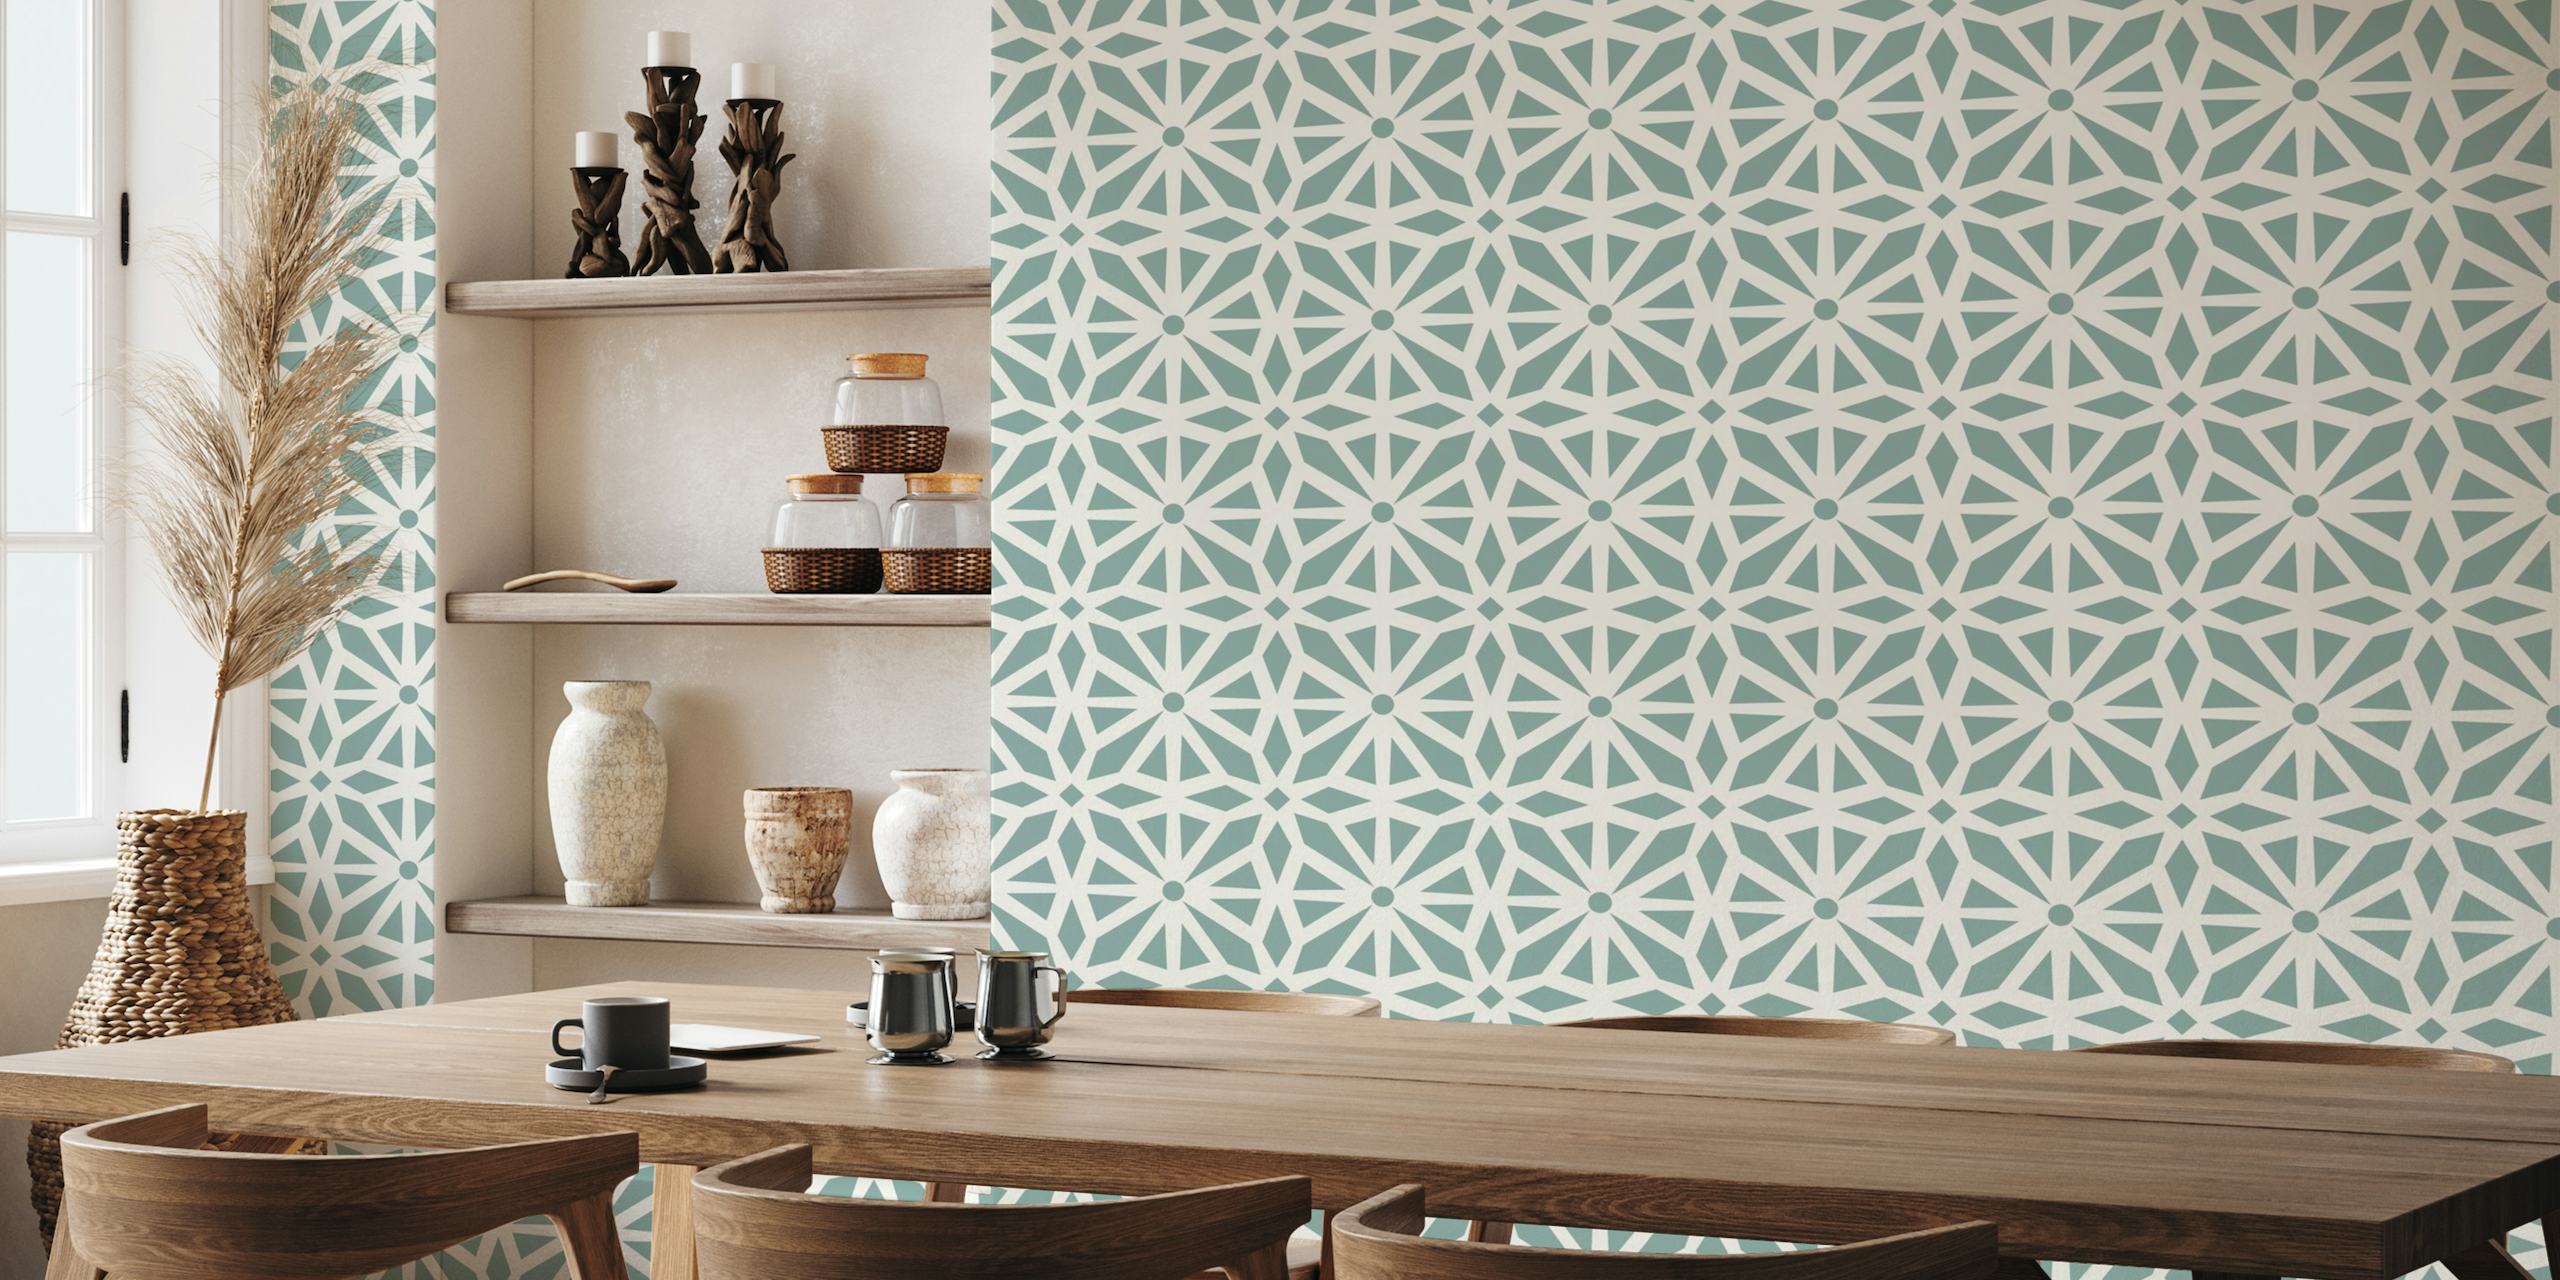 Geometric pattern wall mural 'Meeting Point' with contemporary design